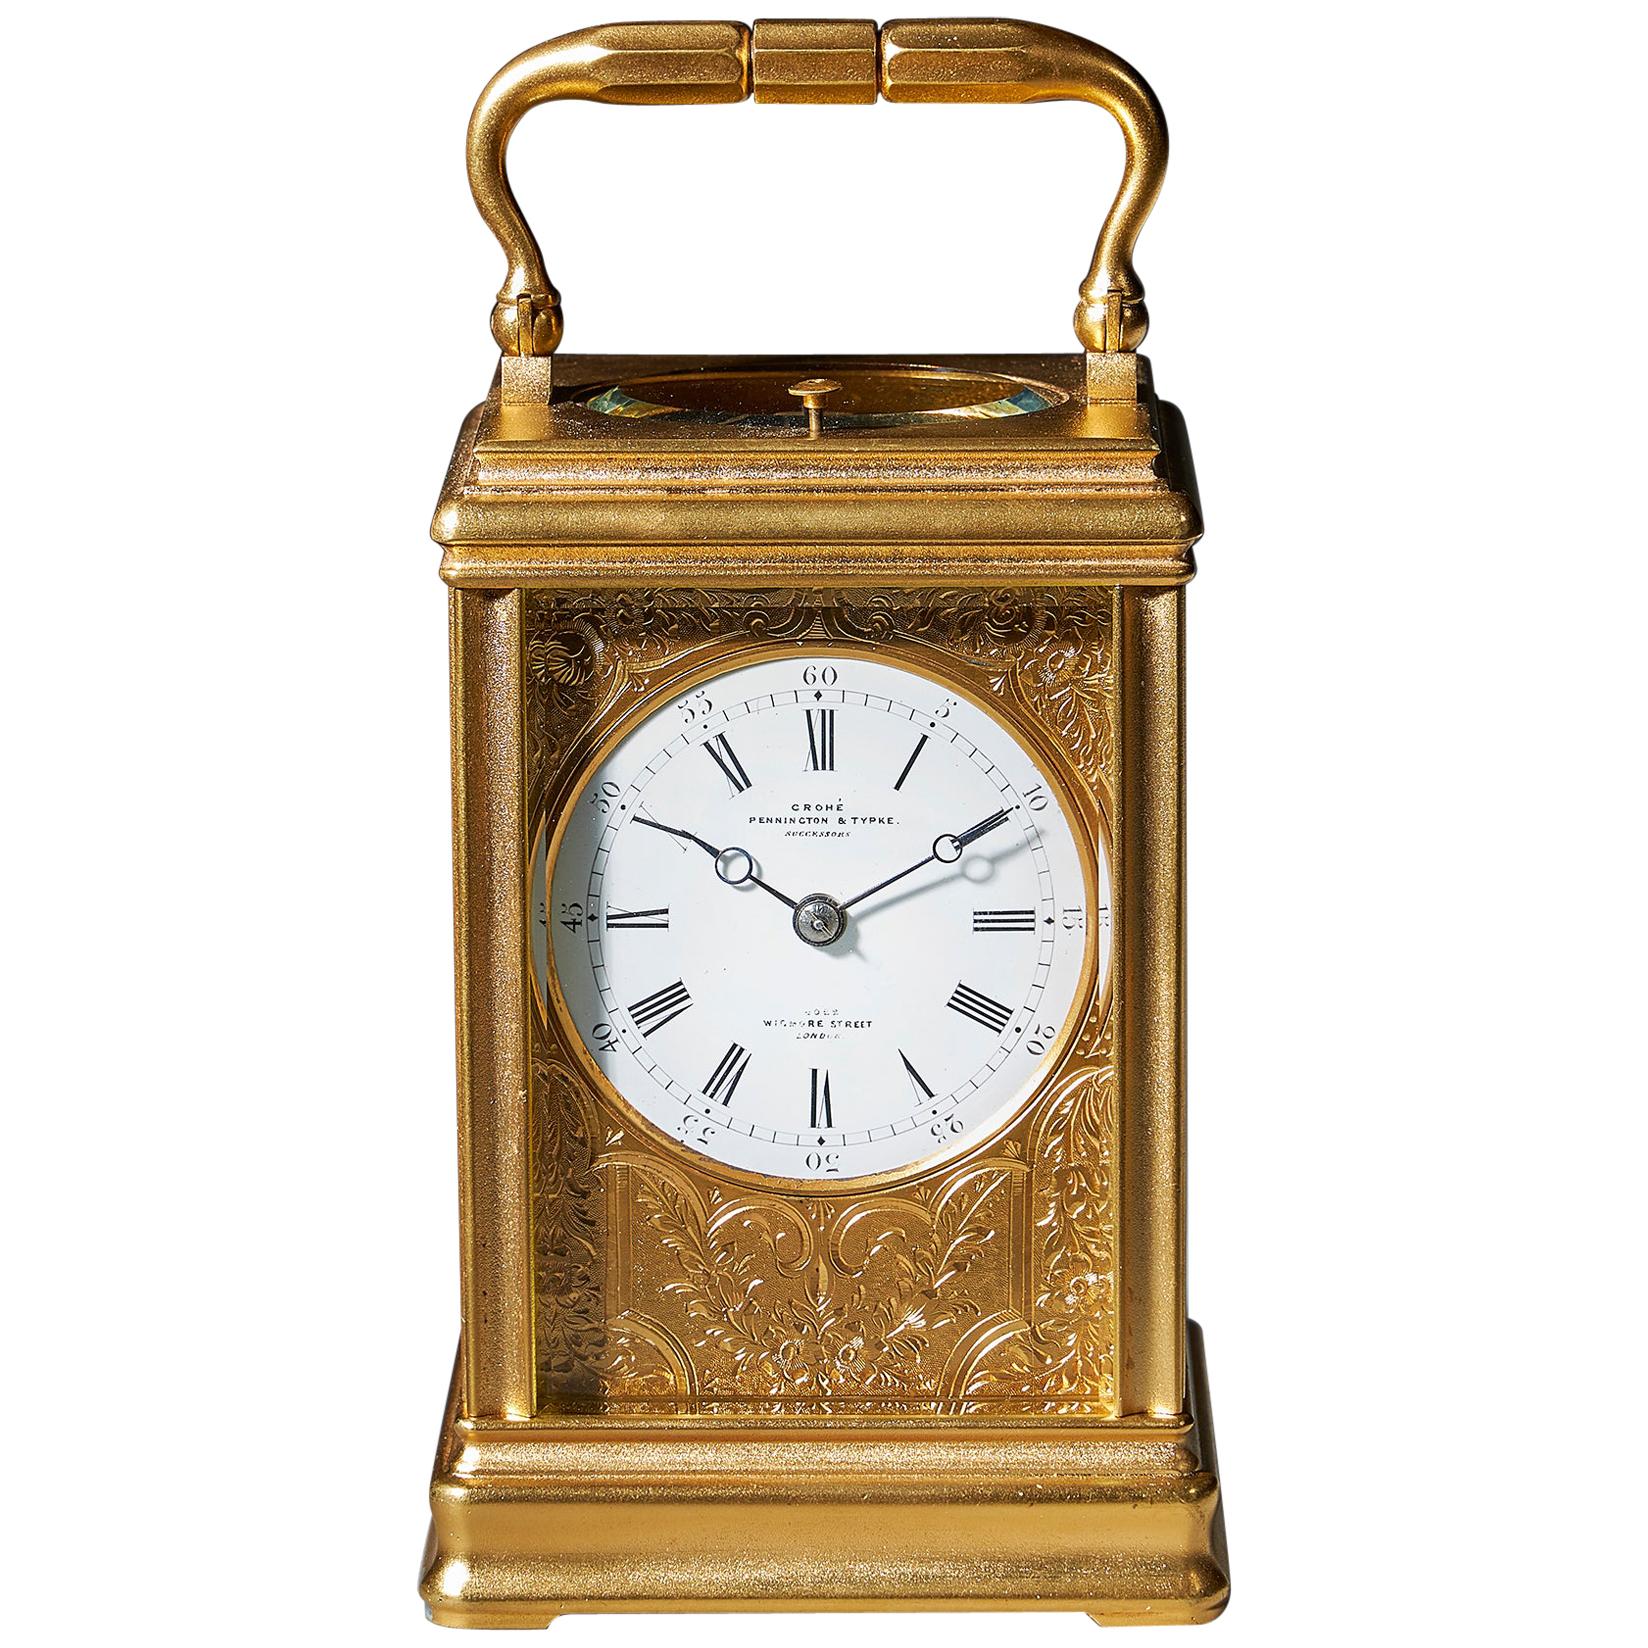 19th Century Repeating Gilt-Brass Carriage Clock by the Famous Drocourt